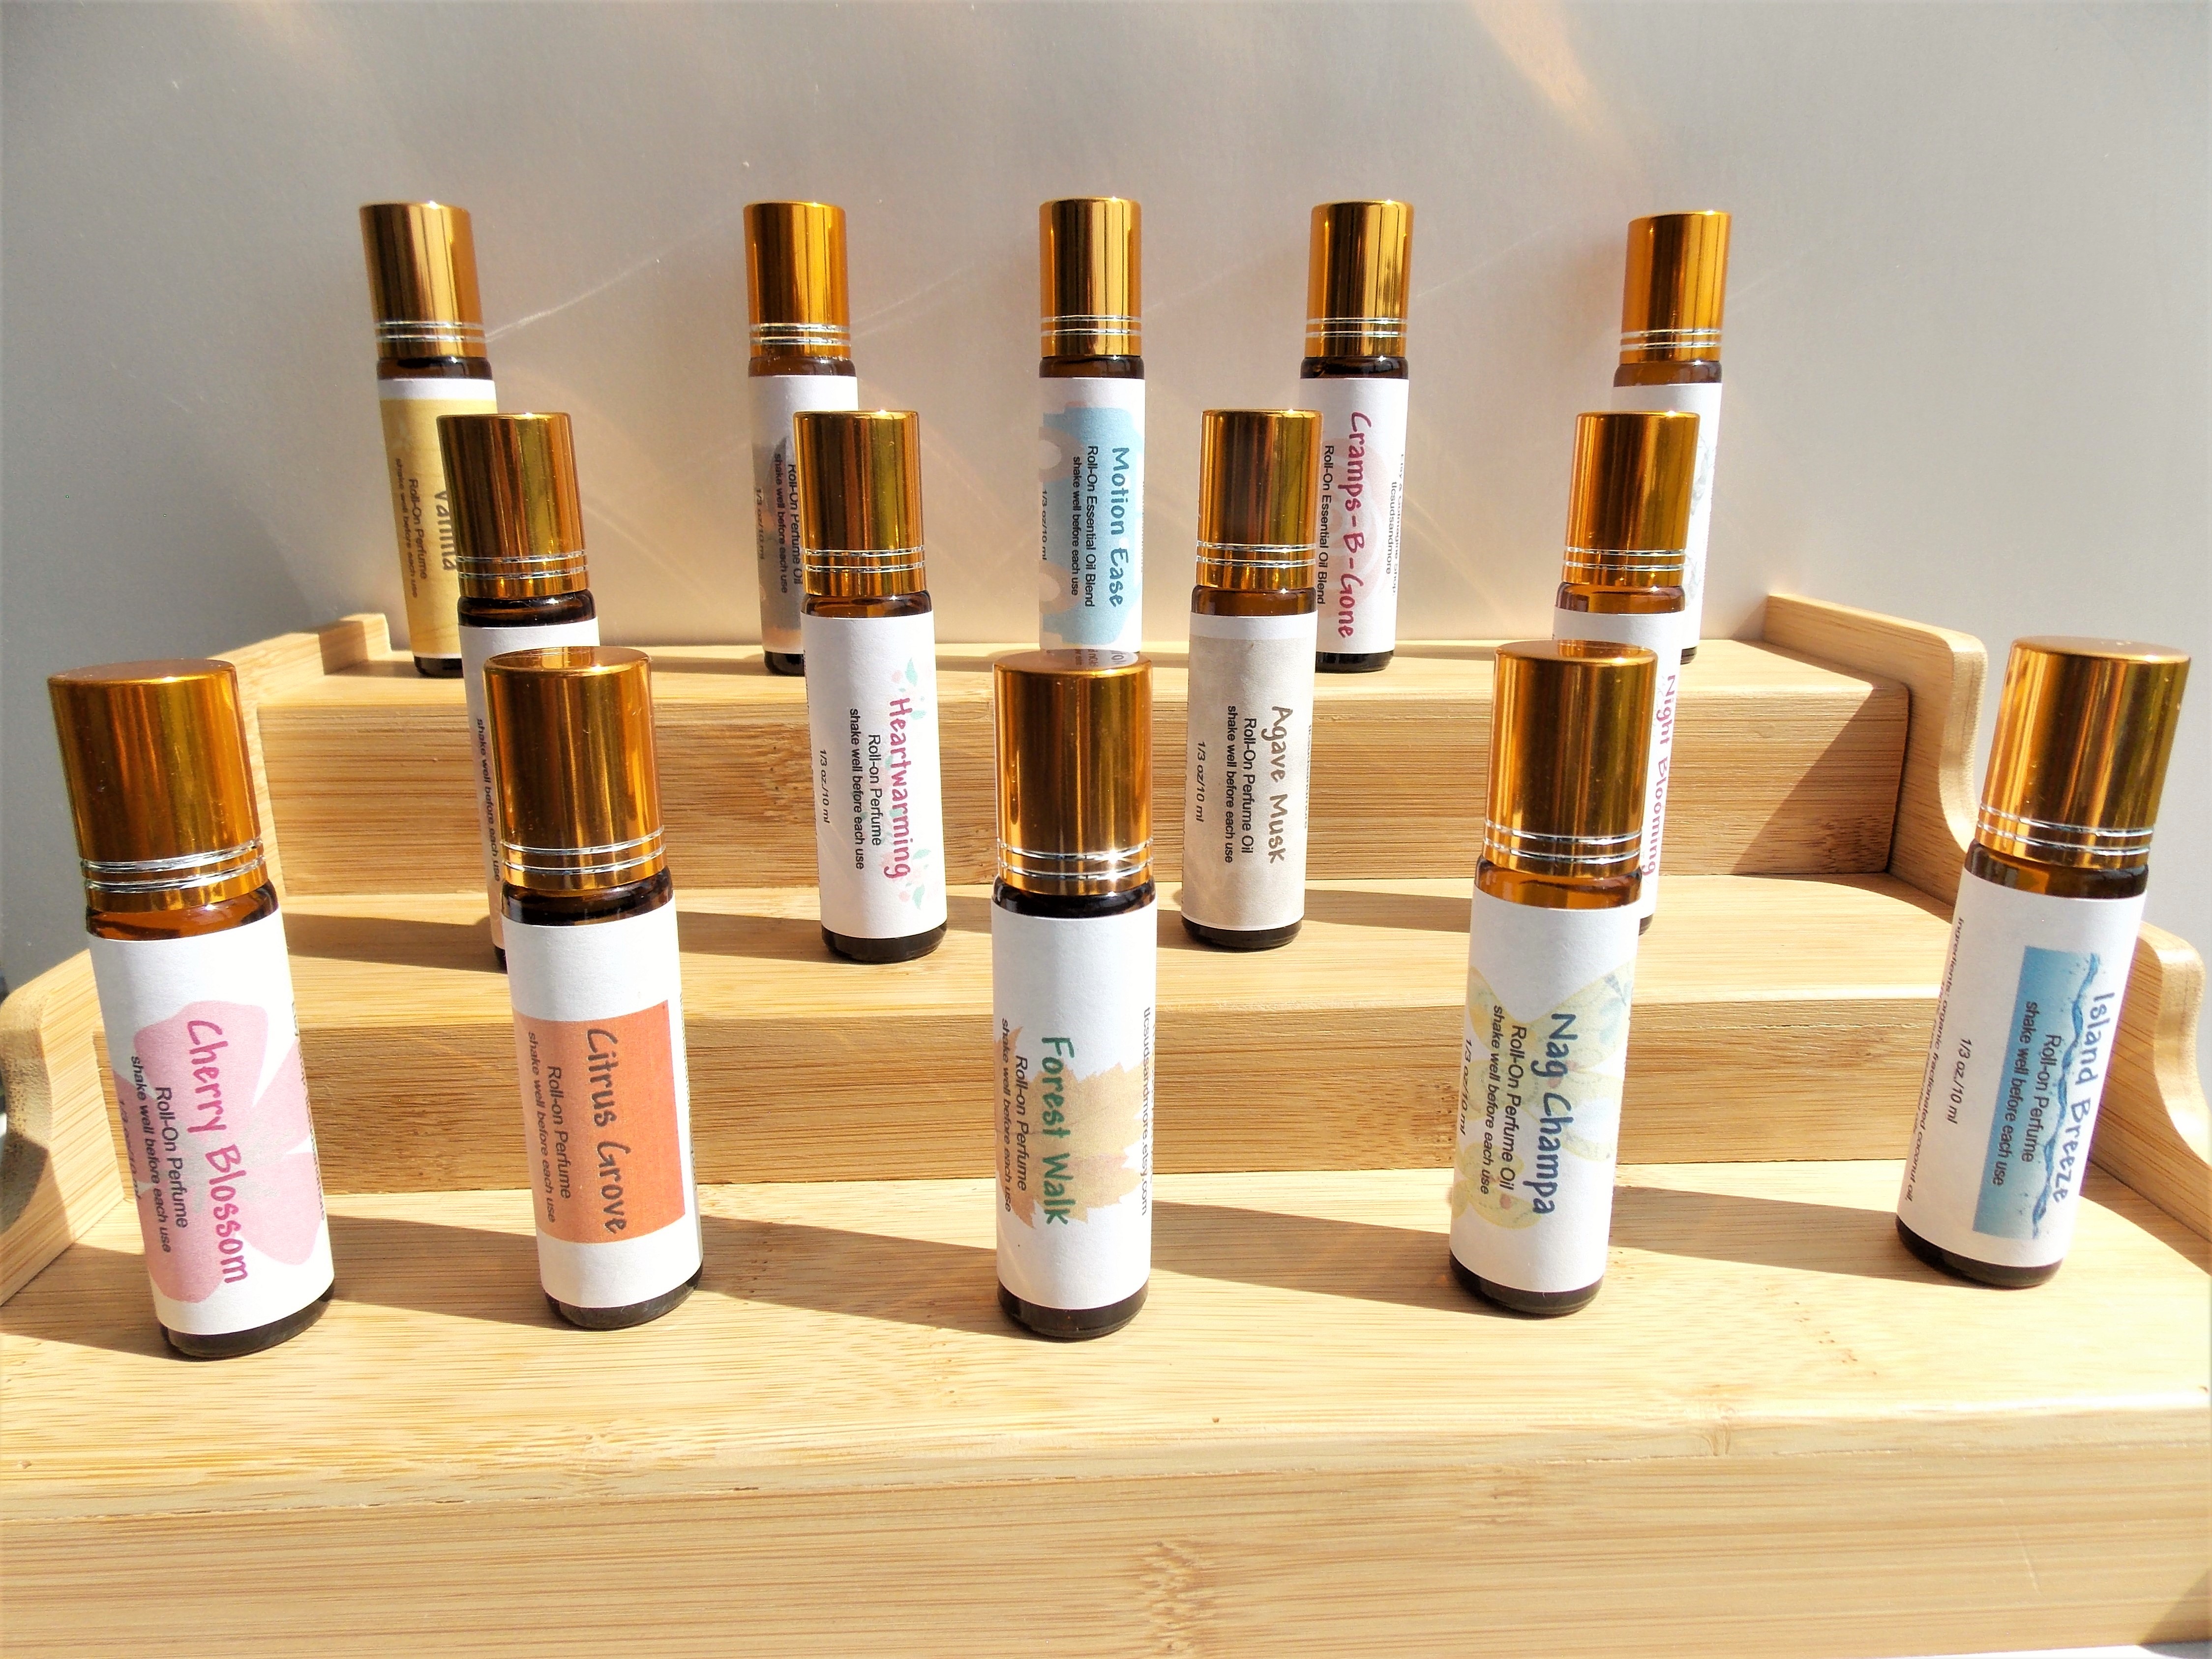 Natural Amber Perfume Oil, 100% Pure Essential Oil Blend, Aromatherapy  Blends, All Natural Essential Oils, Vanilla Orange Caramel 